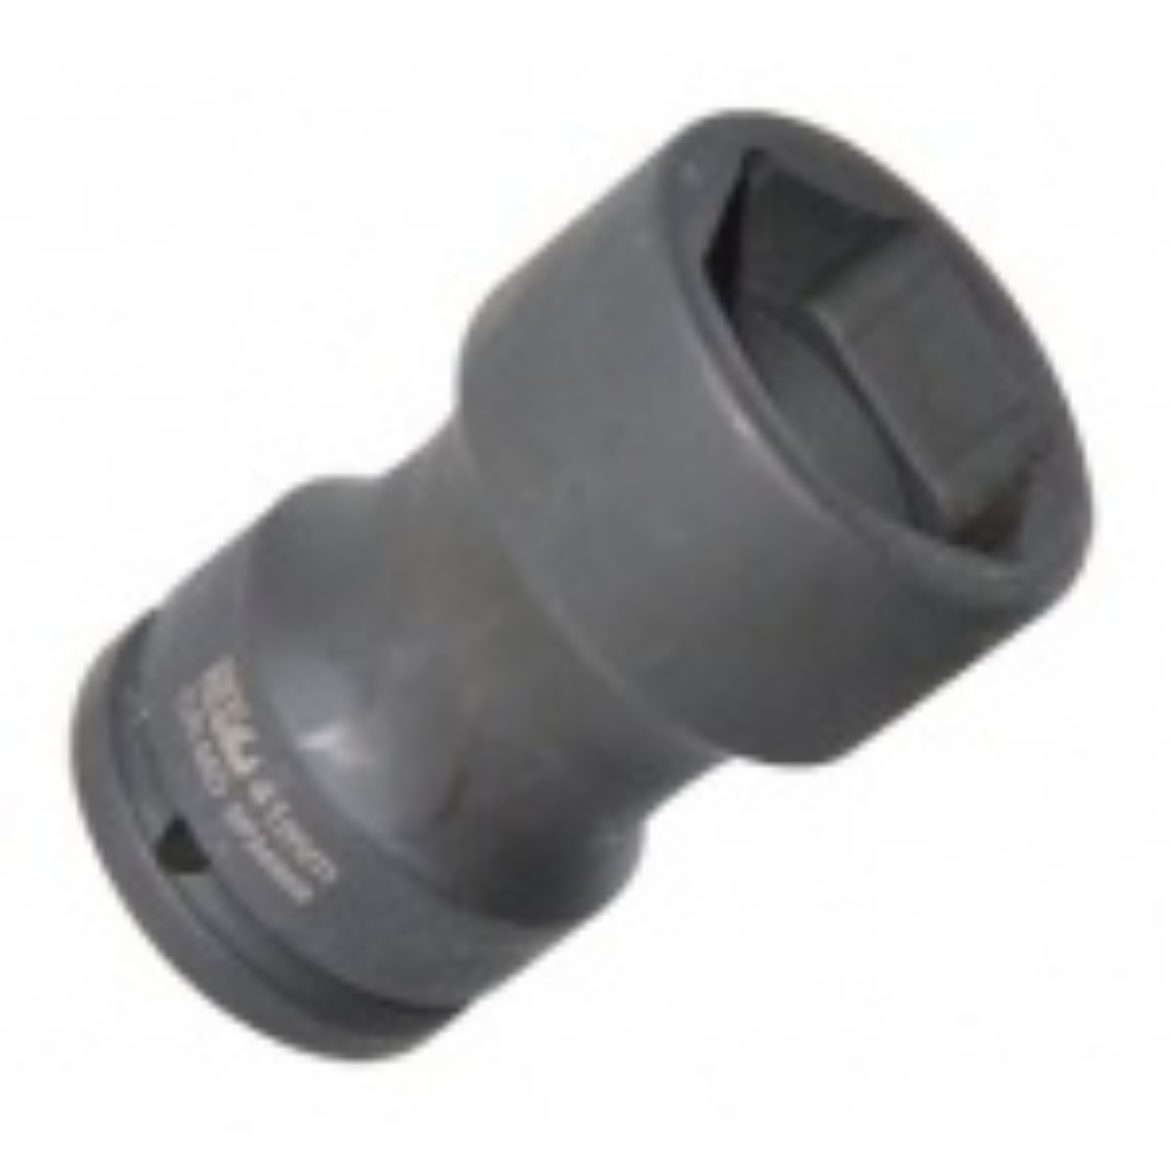 Picture of SOCKET IMPACT 3/4"DR BUDD WHEEL METRIC 35MM SP TOOLS